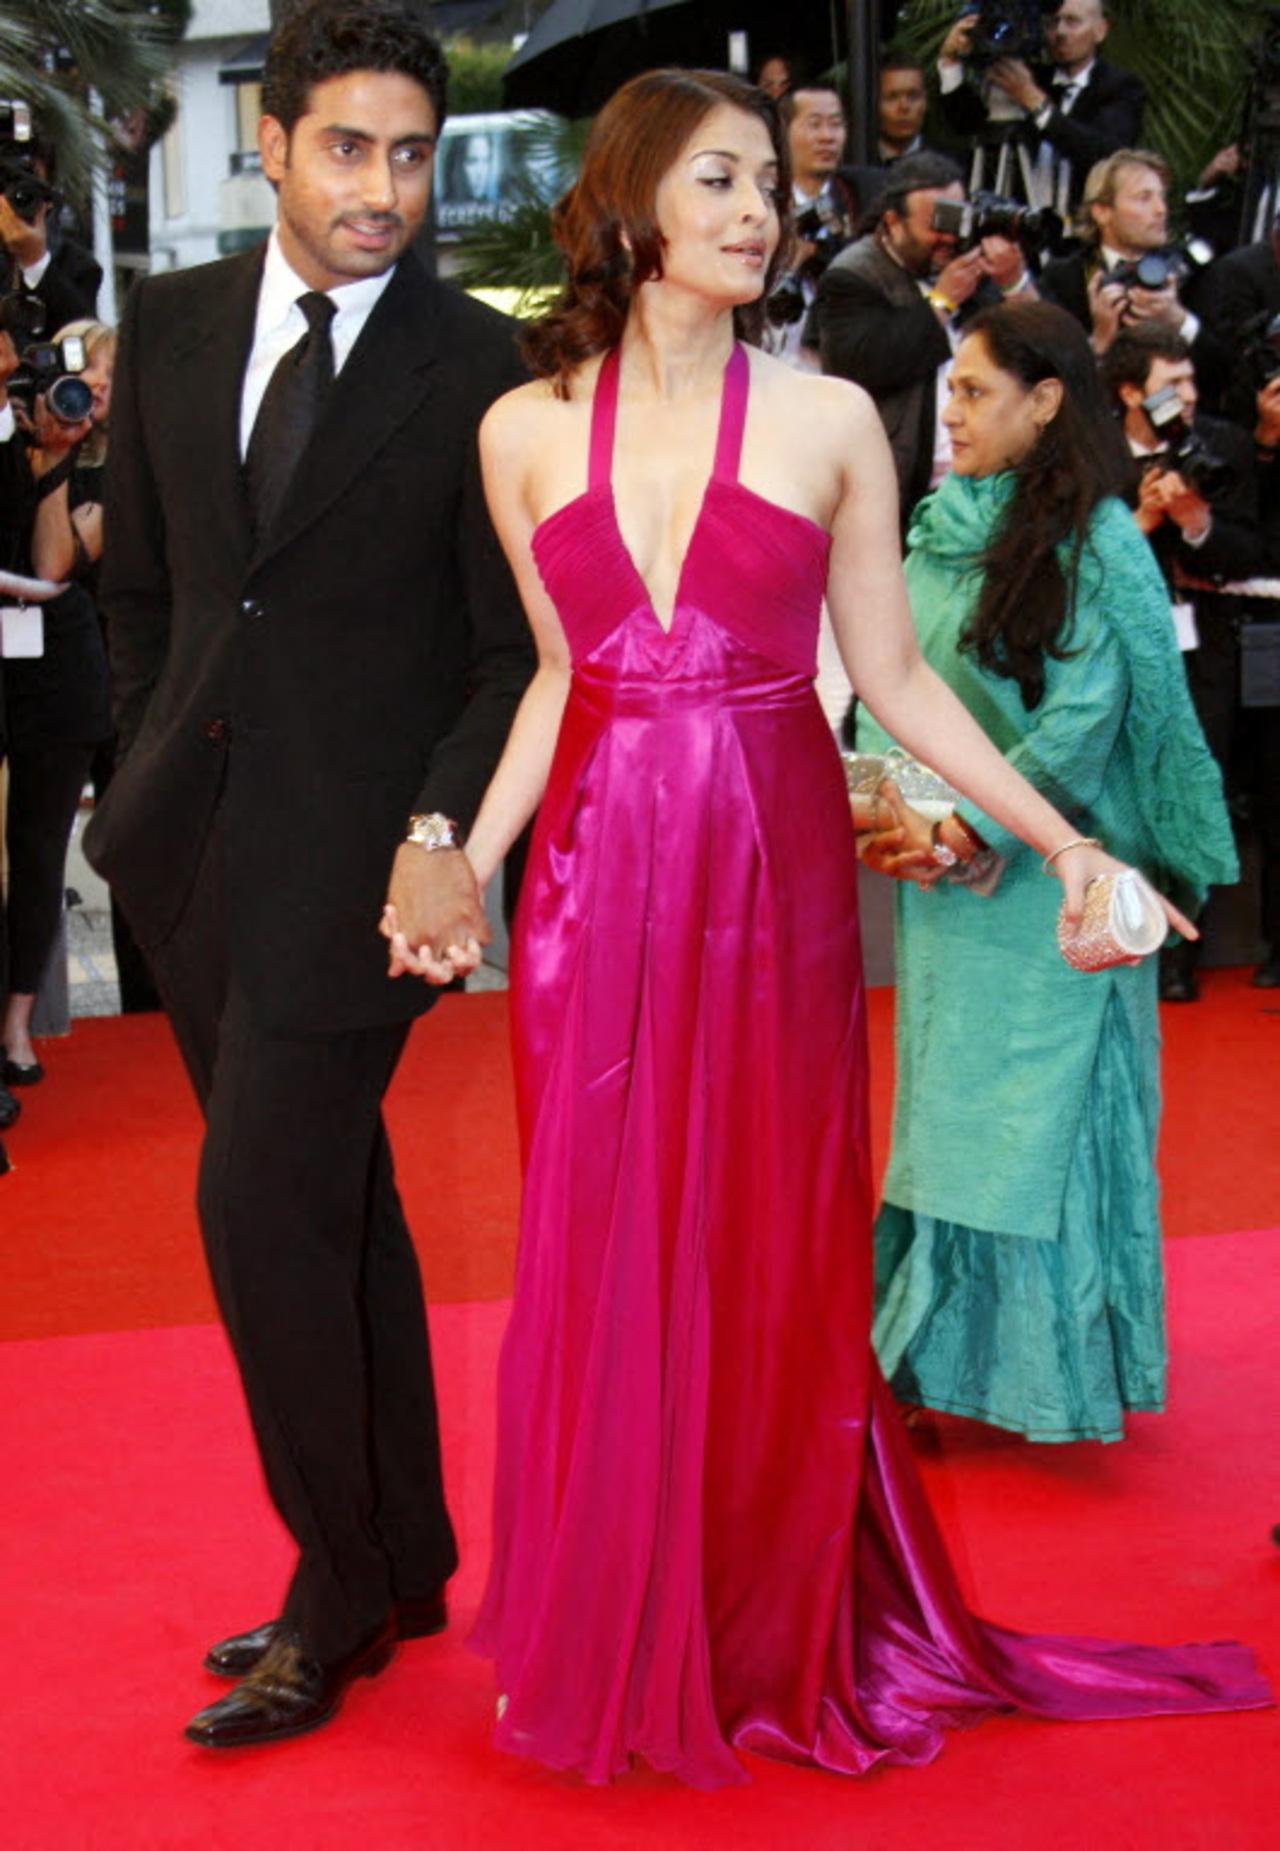 Aishwarya stunned in a hot pink gown as she arrived with Abhishek at the screening of US director Woody Allen's film 'Vicky Cristina Barcelona' at the 61st Cannes International Film Festival.